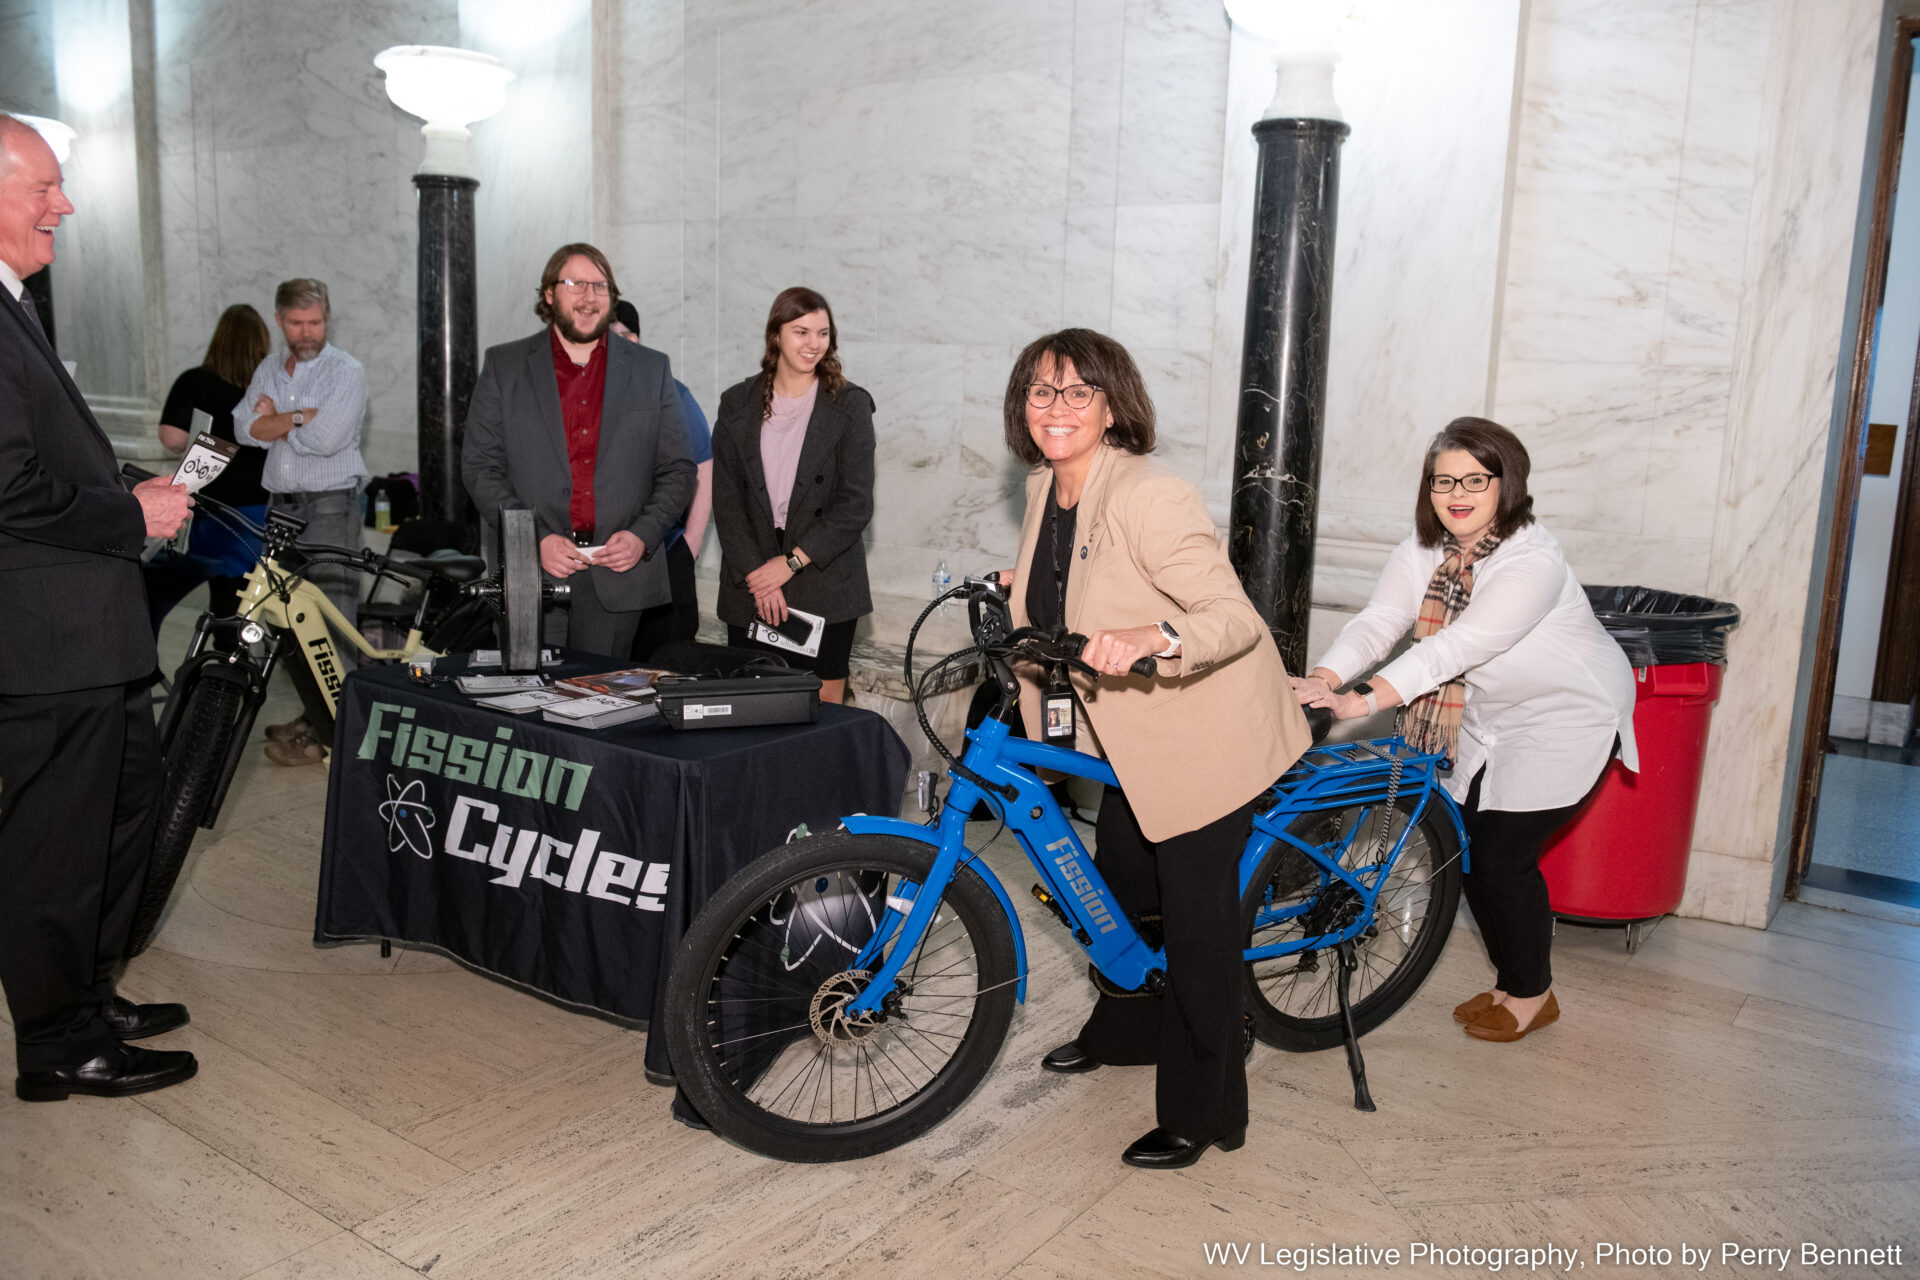 Adventure Travel Day At The Capitol Includes E-bikes